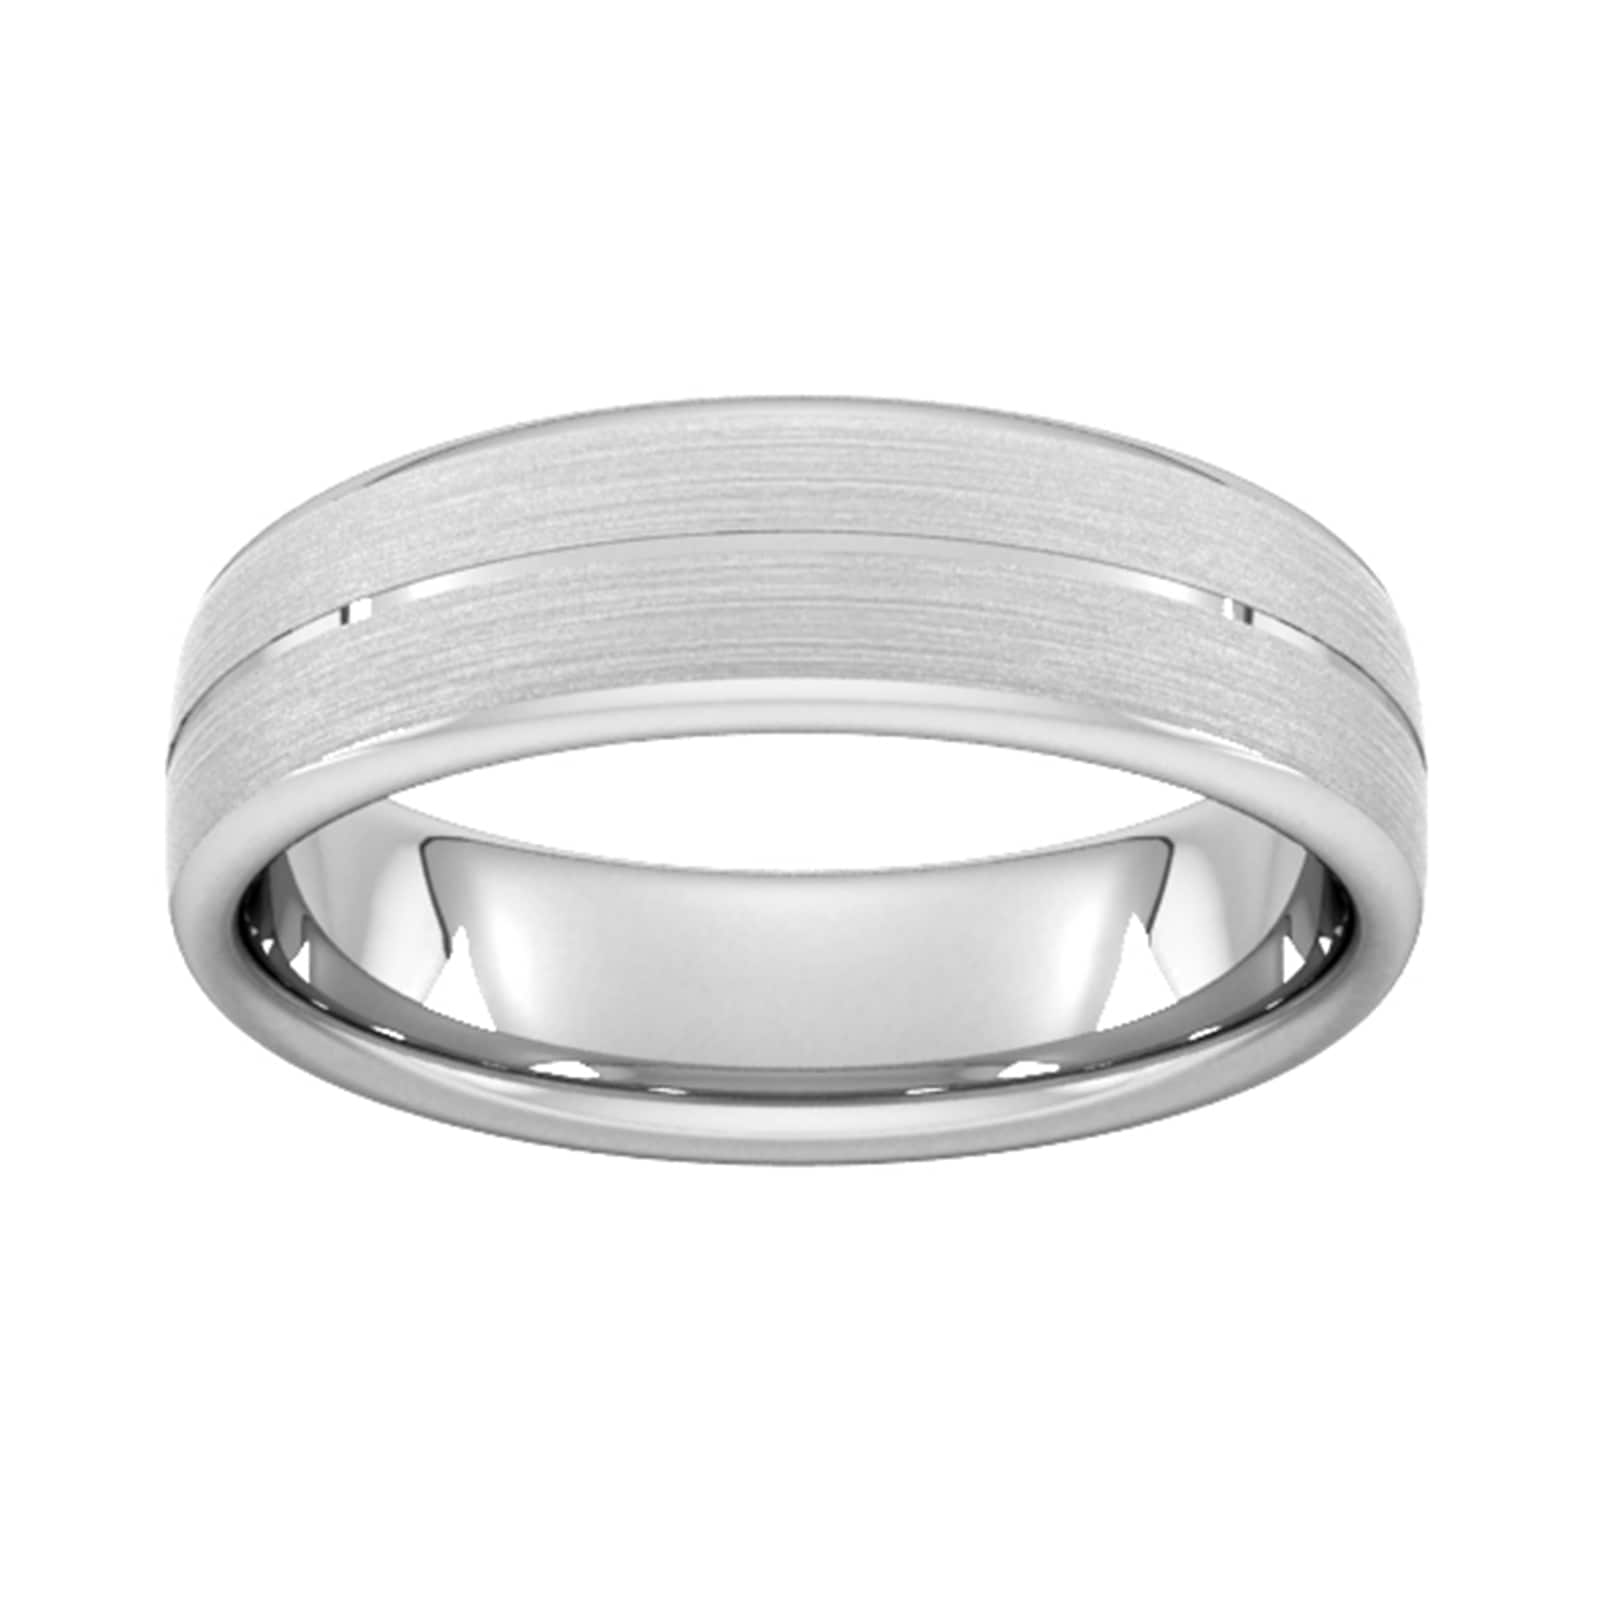 6mm D Shape Standard Centre Groove With Chamfered Edge Wedding Ring In 18 Carat White Gold - Ring Size N